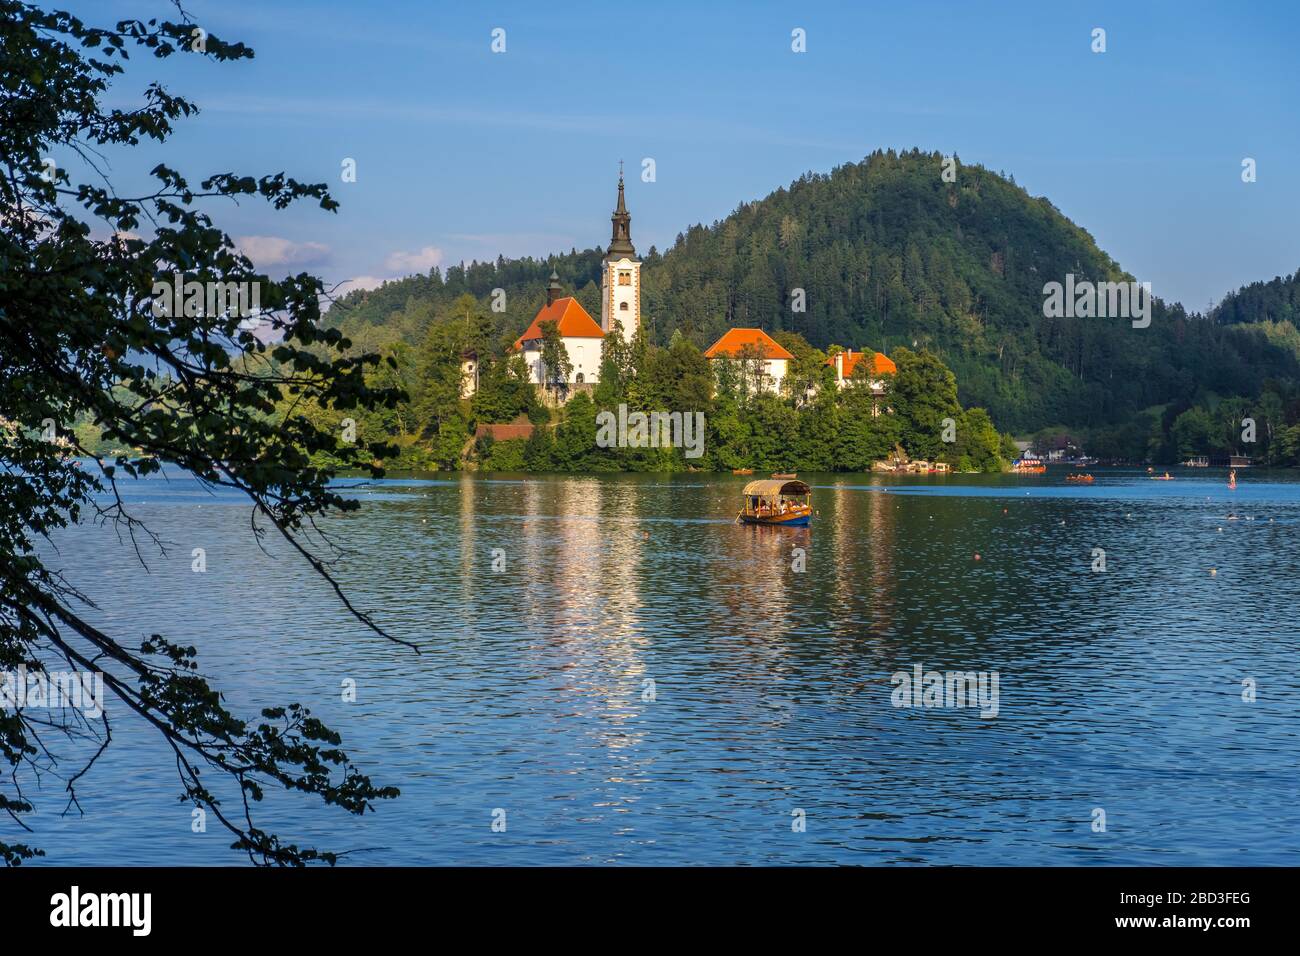 Bled, Slovenia - August 09, 2019: Amazing Bled Lake at sunset with church dedicated to the Assumption of Mary on a small island and Pletna wooden boat Stock Photo